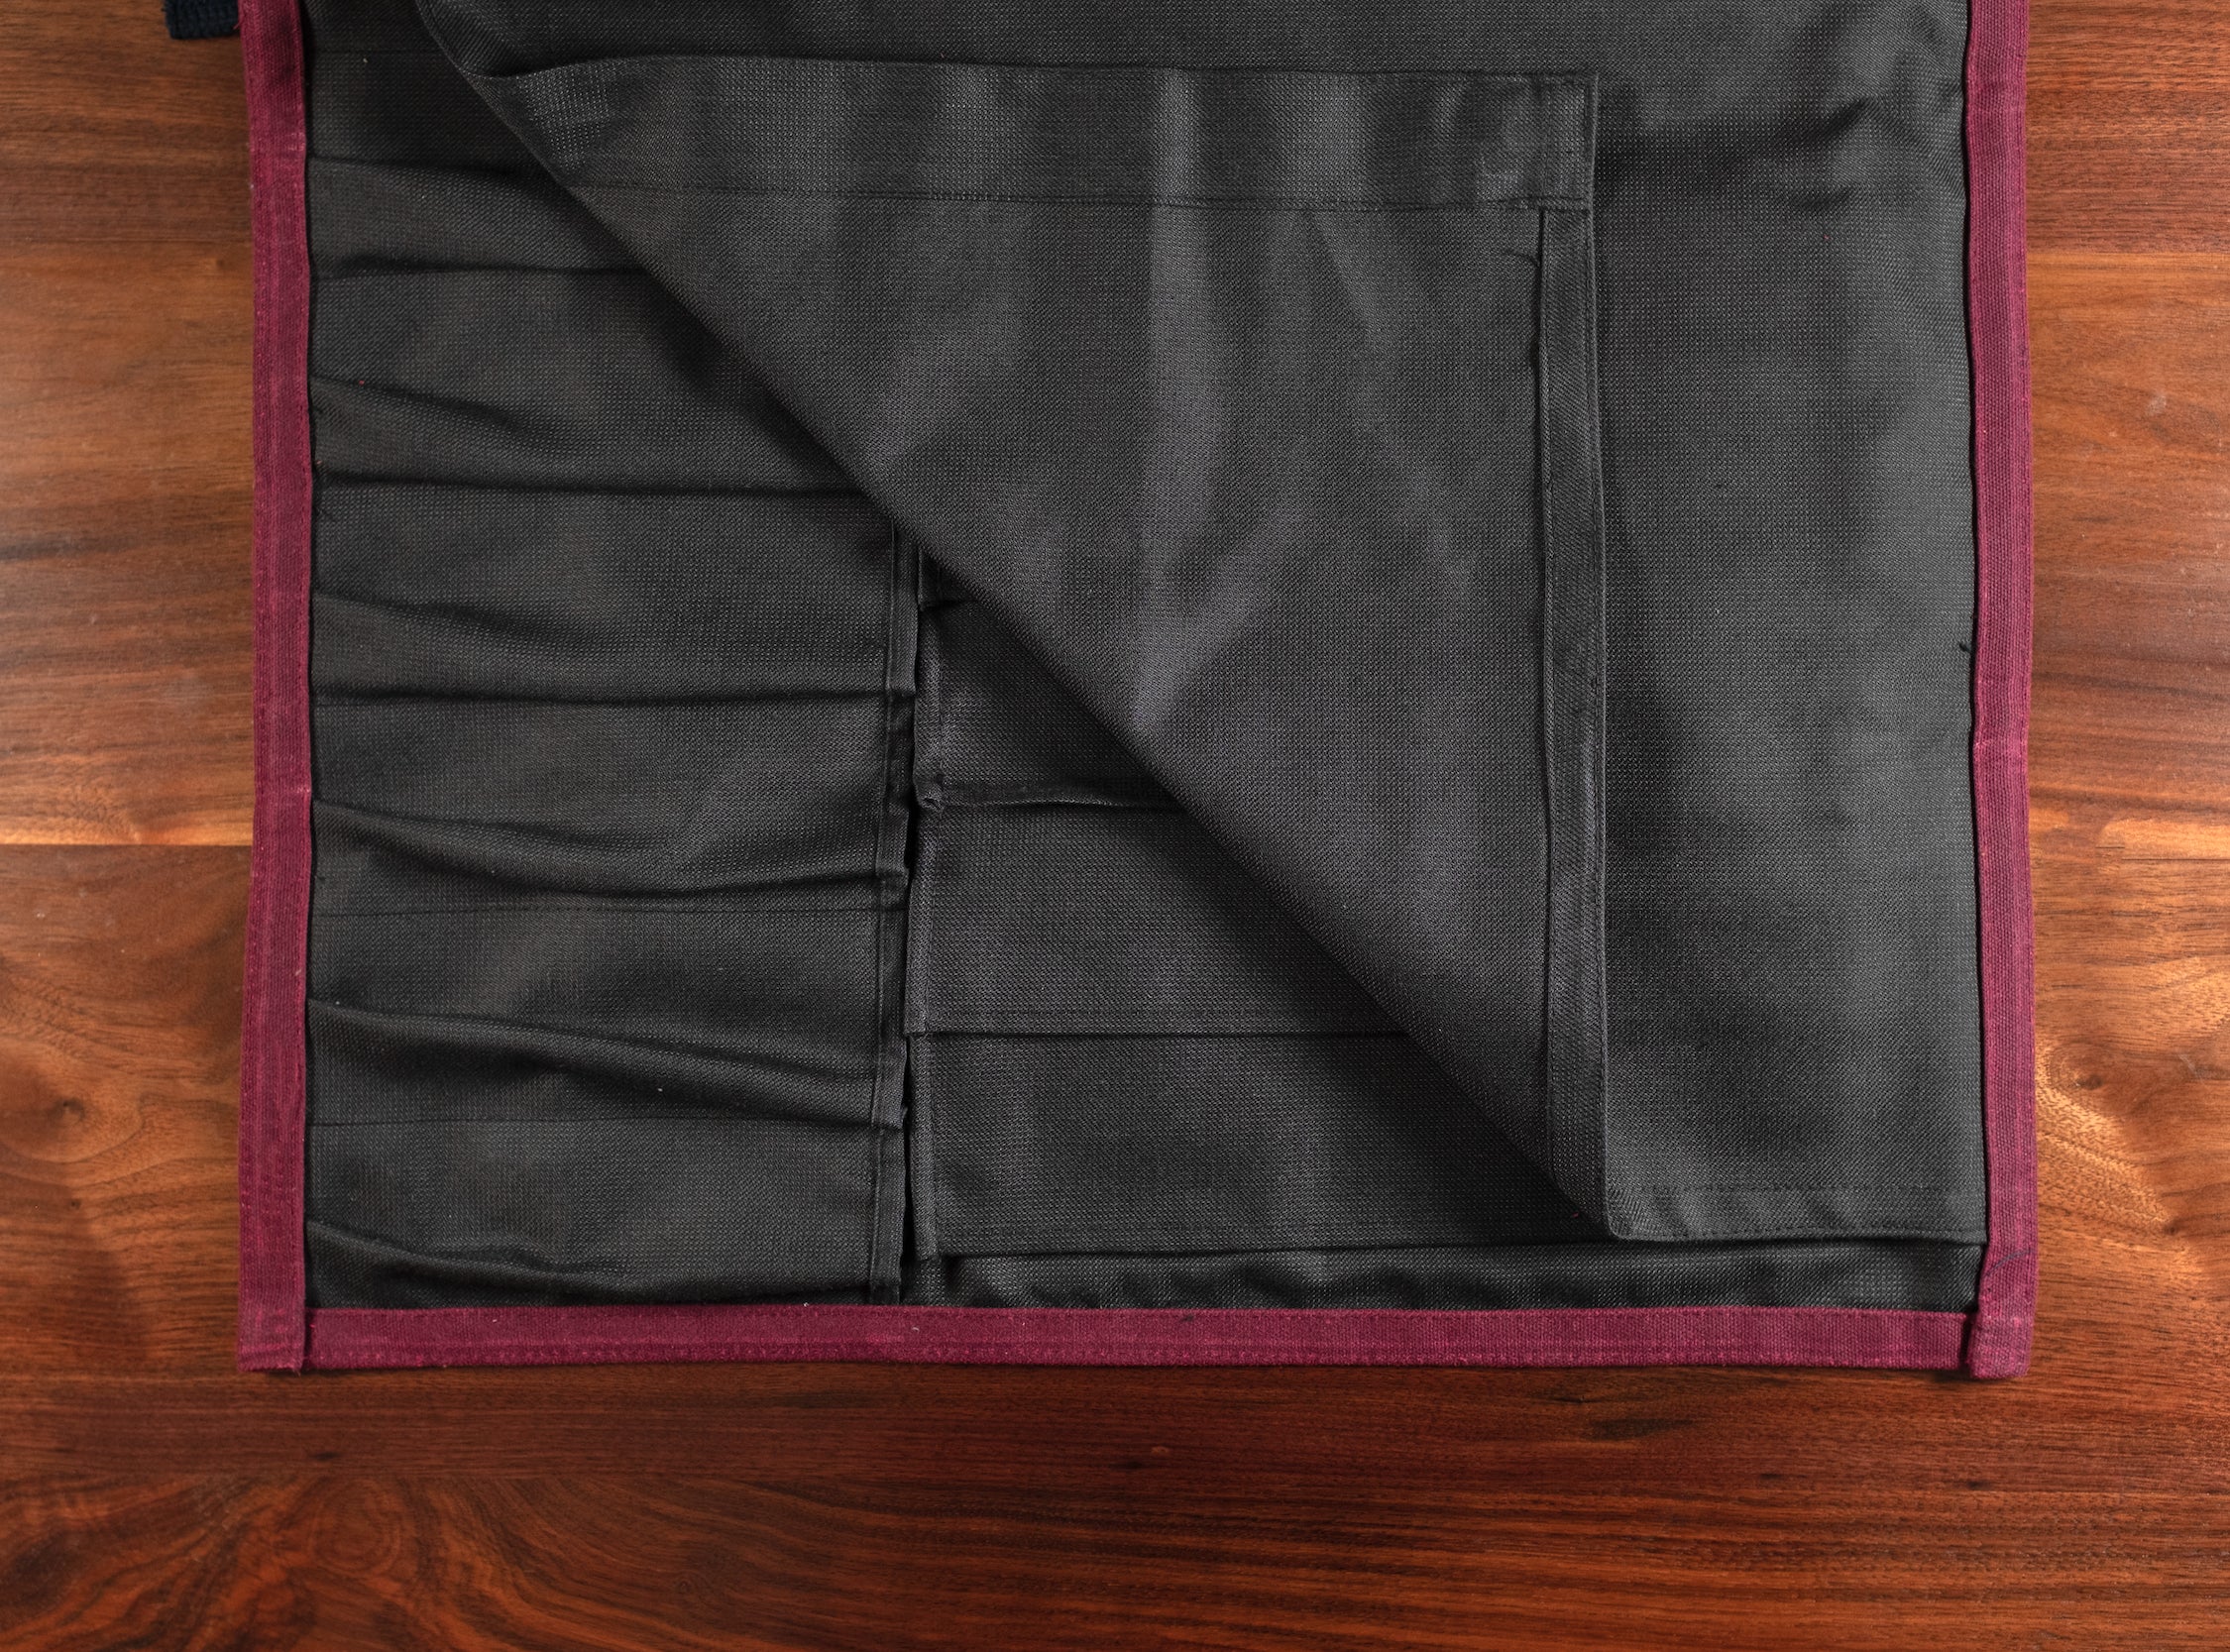 The interior of the Main Squeeze burgundy knife roll laid out flat on a wooden surface. The interior is a 50-50 Kevlar/Nomex blend. Every stitch made by Craftmade Aprons, Minnesota.